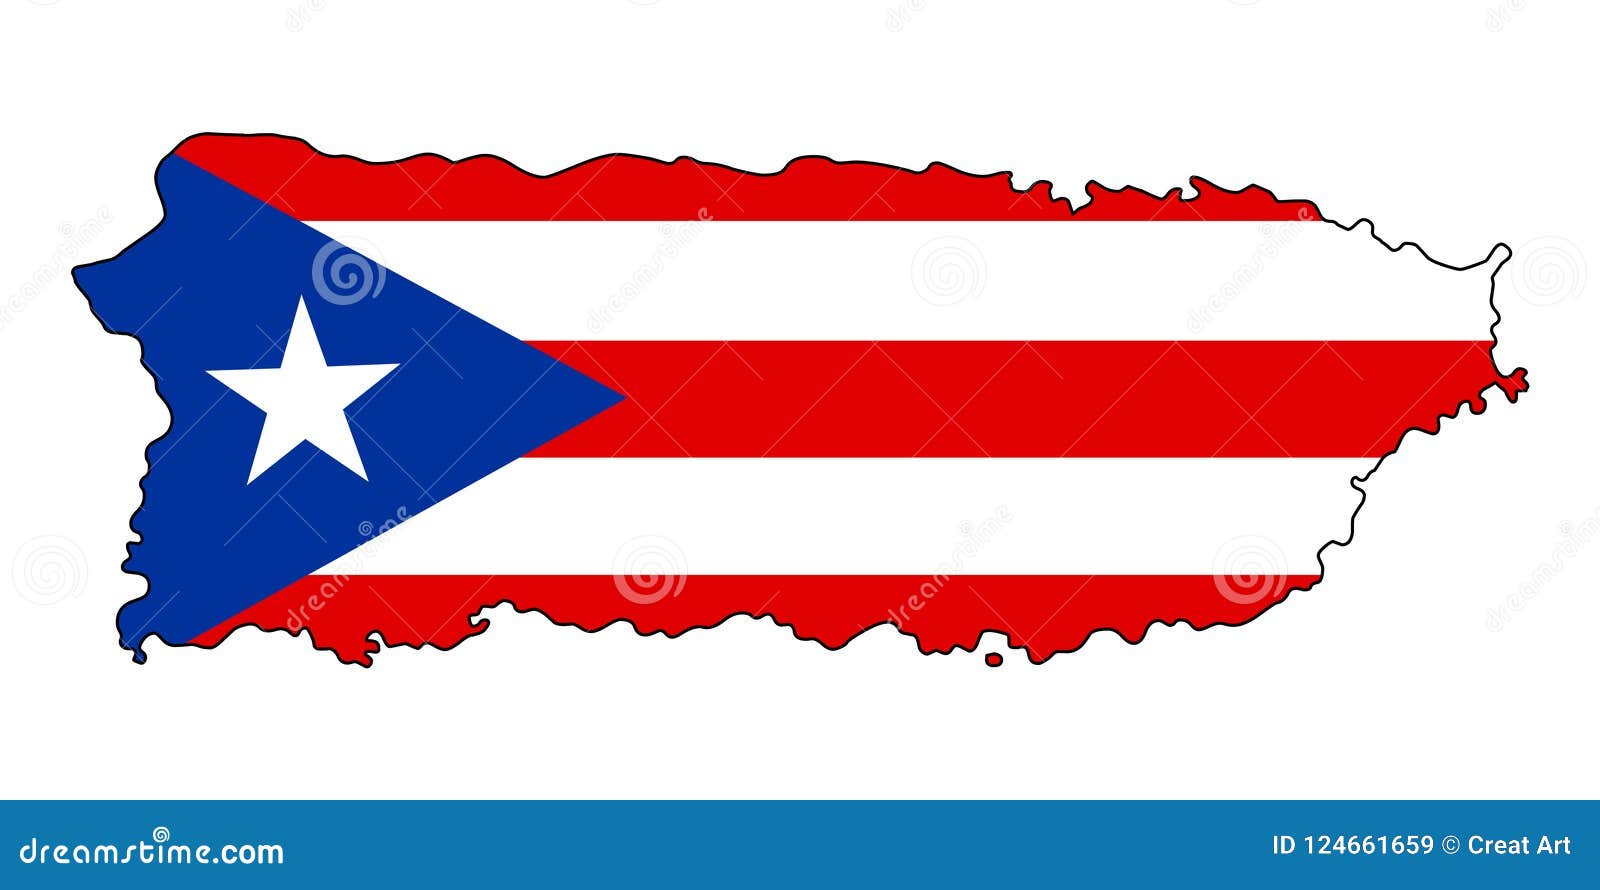 Puerto Rico Map Of Puerto Rico Vector Illustration Stock Vector Illustration Of Government White